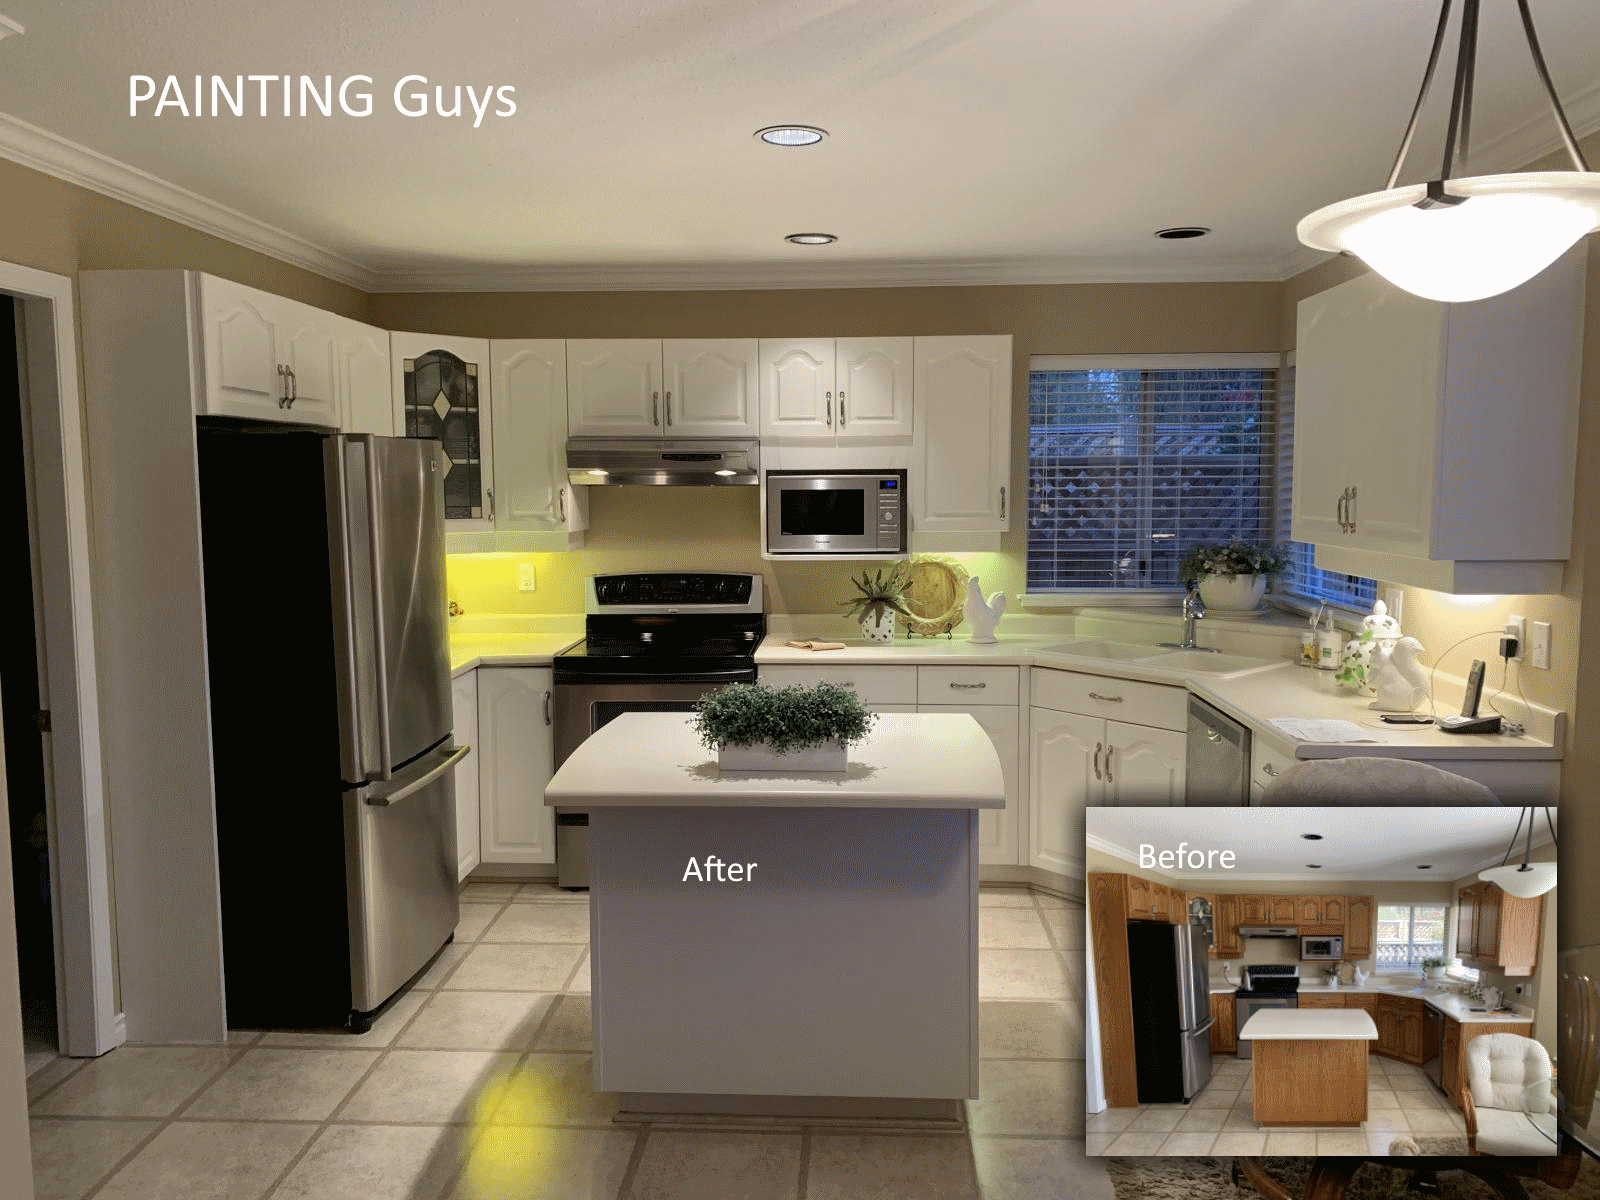 The average cost to paint kitchen cabinets